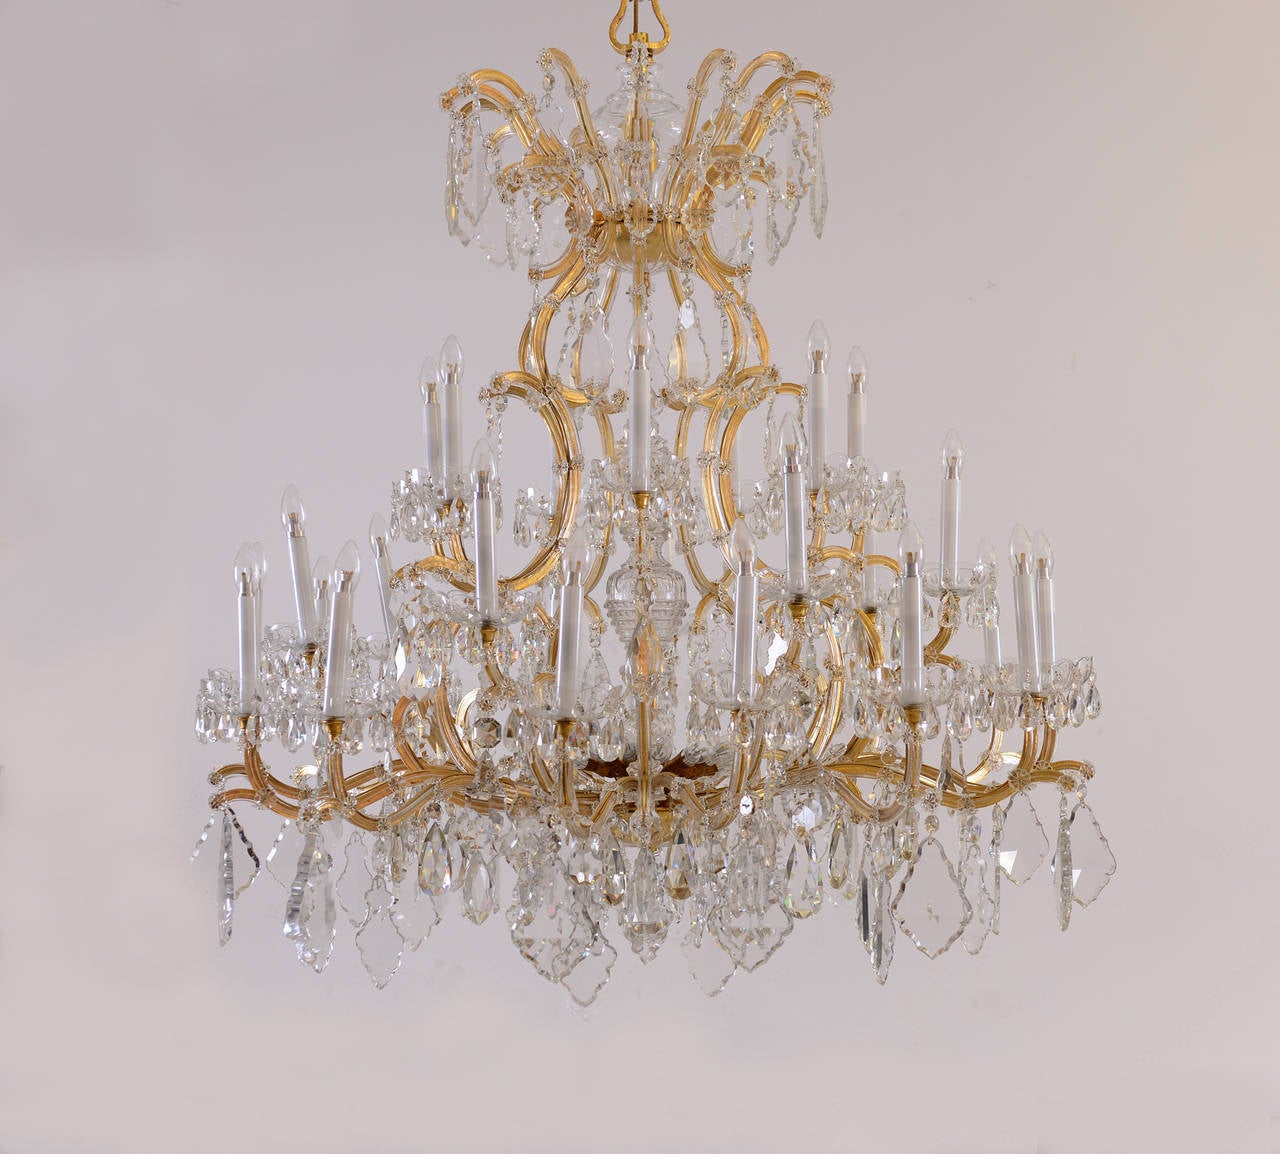 Big, magnificent parlor chandelier so called 